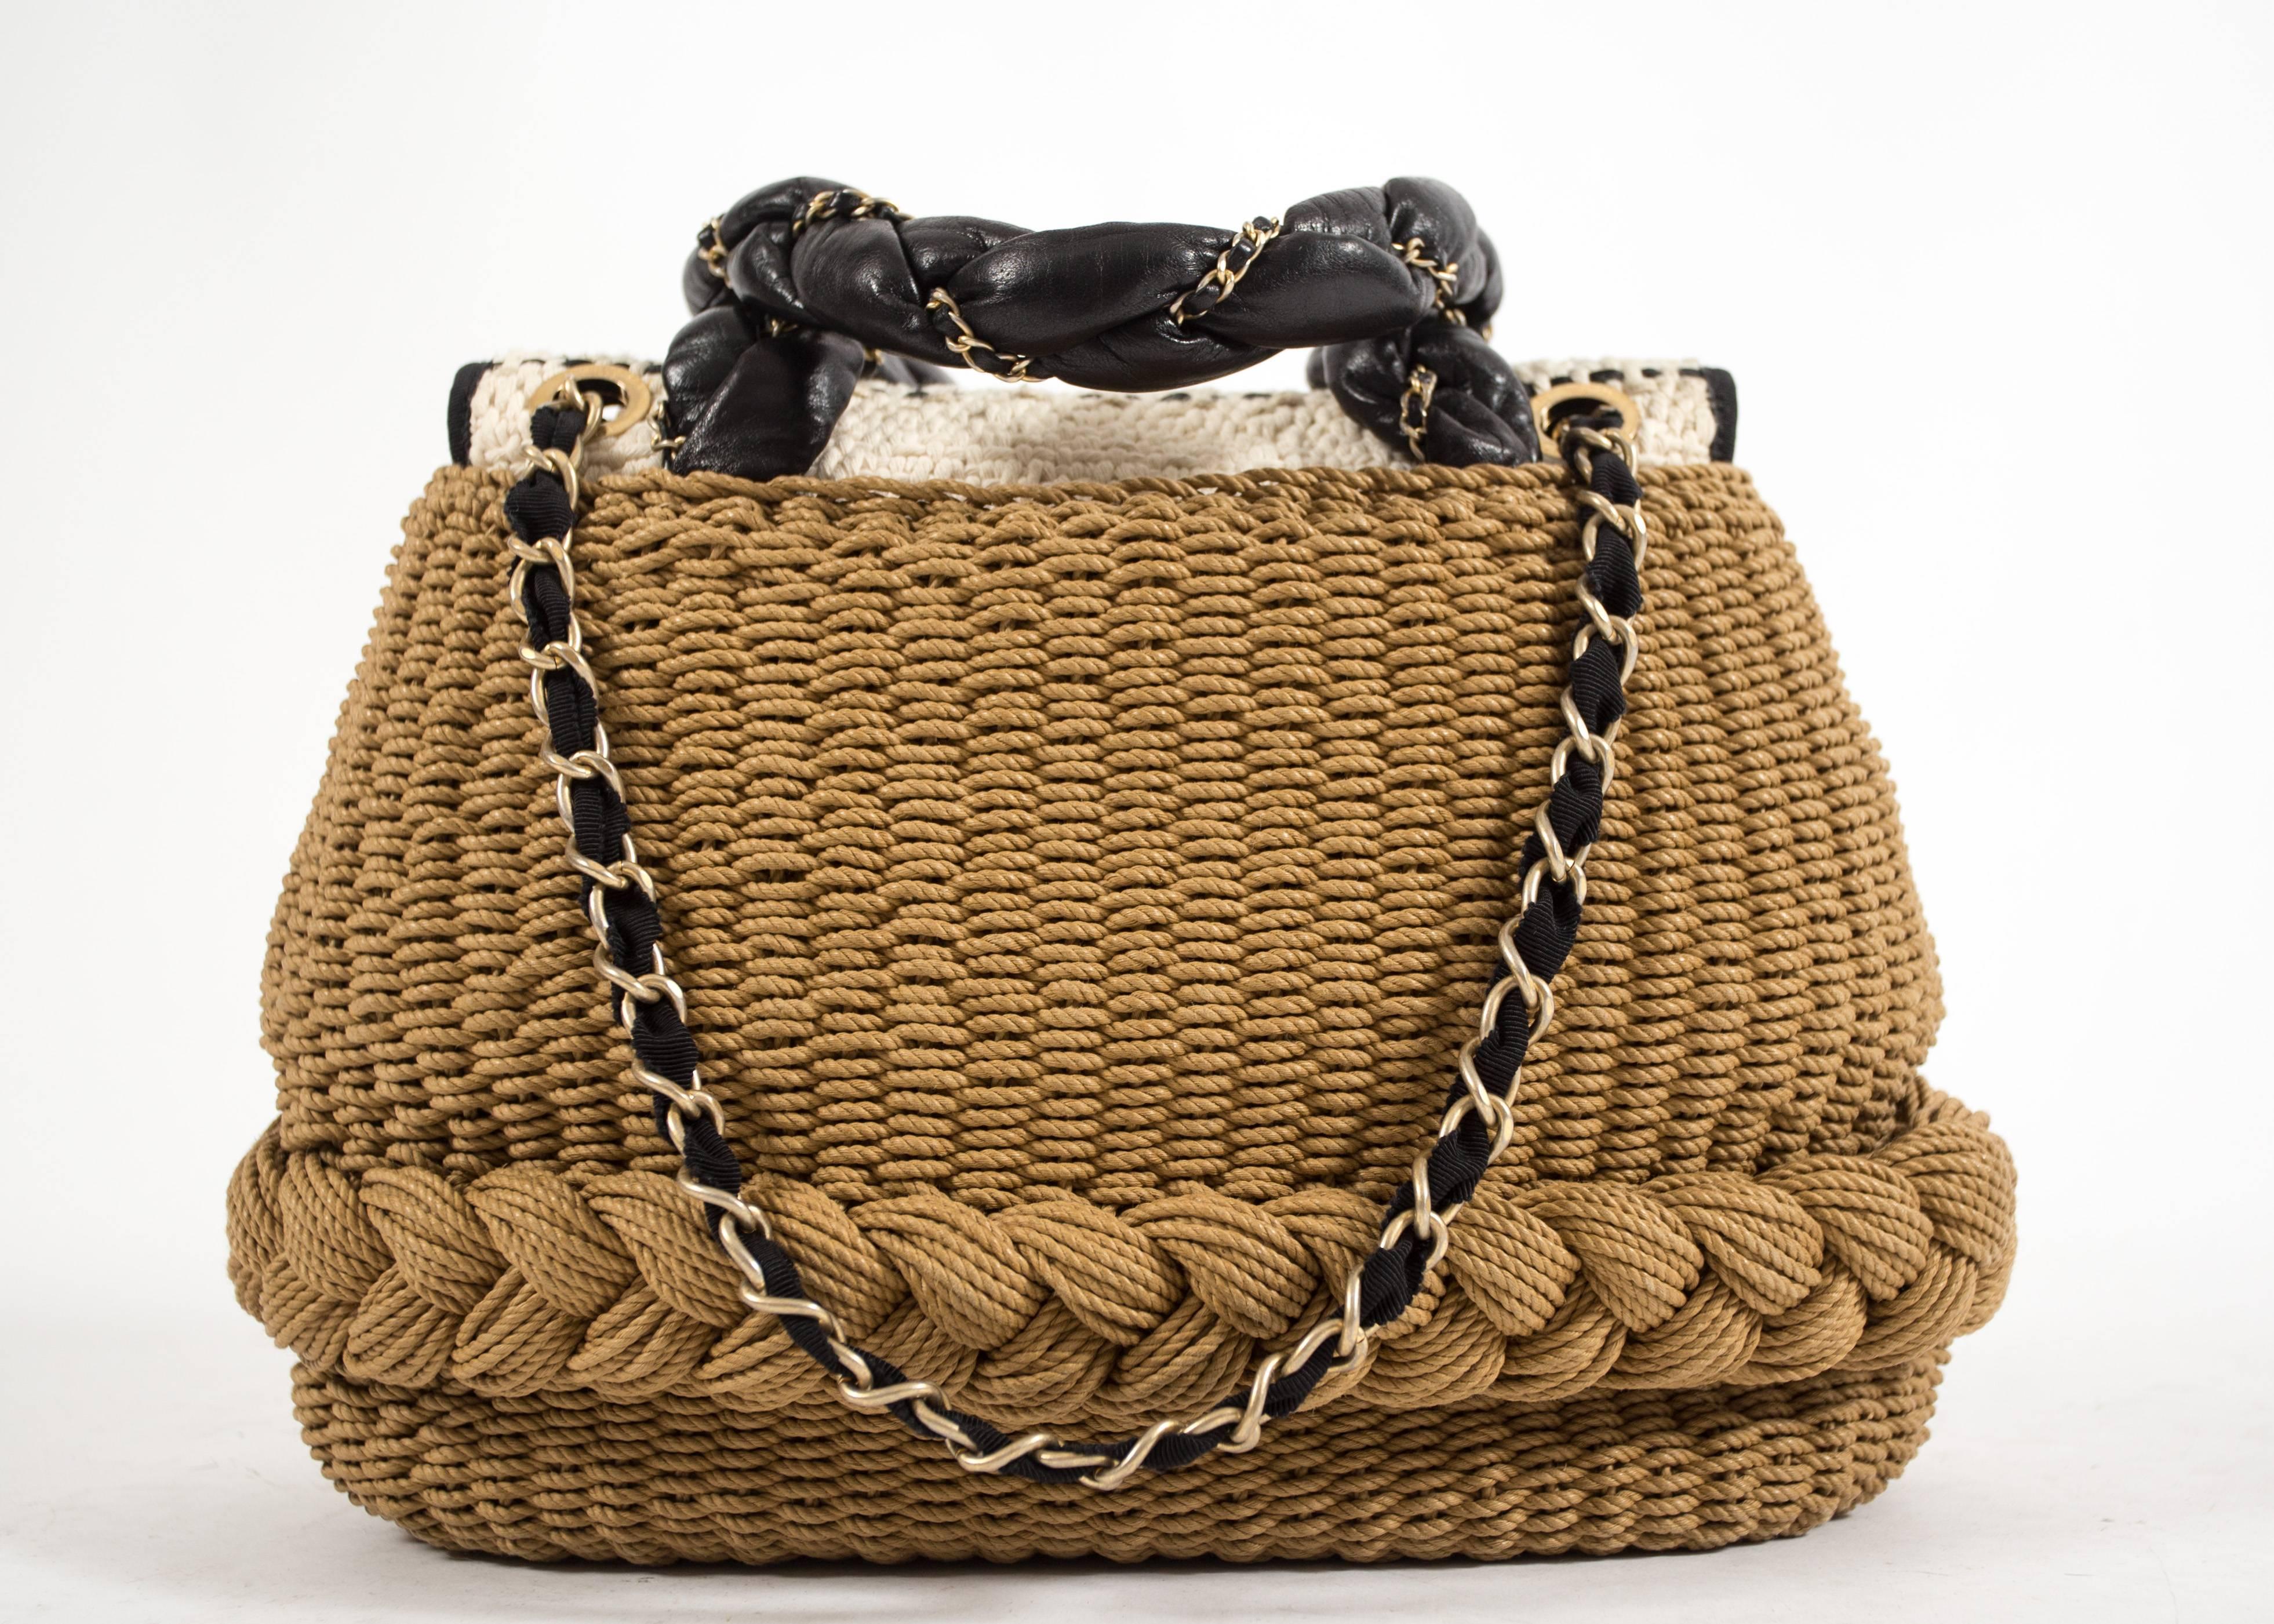 Women's Chanel Spring-Summer 2010 woven straw 'Coco Country' top handle basket bag